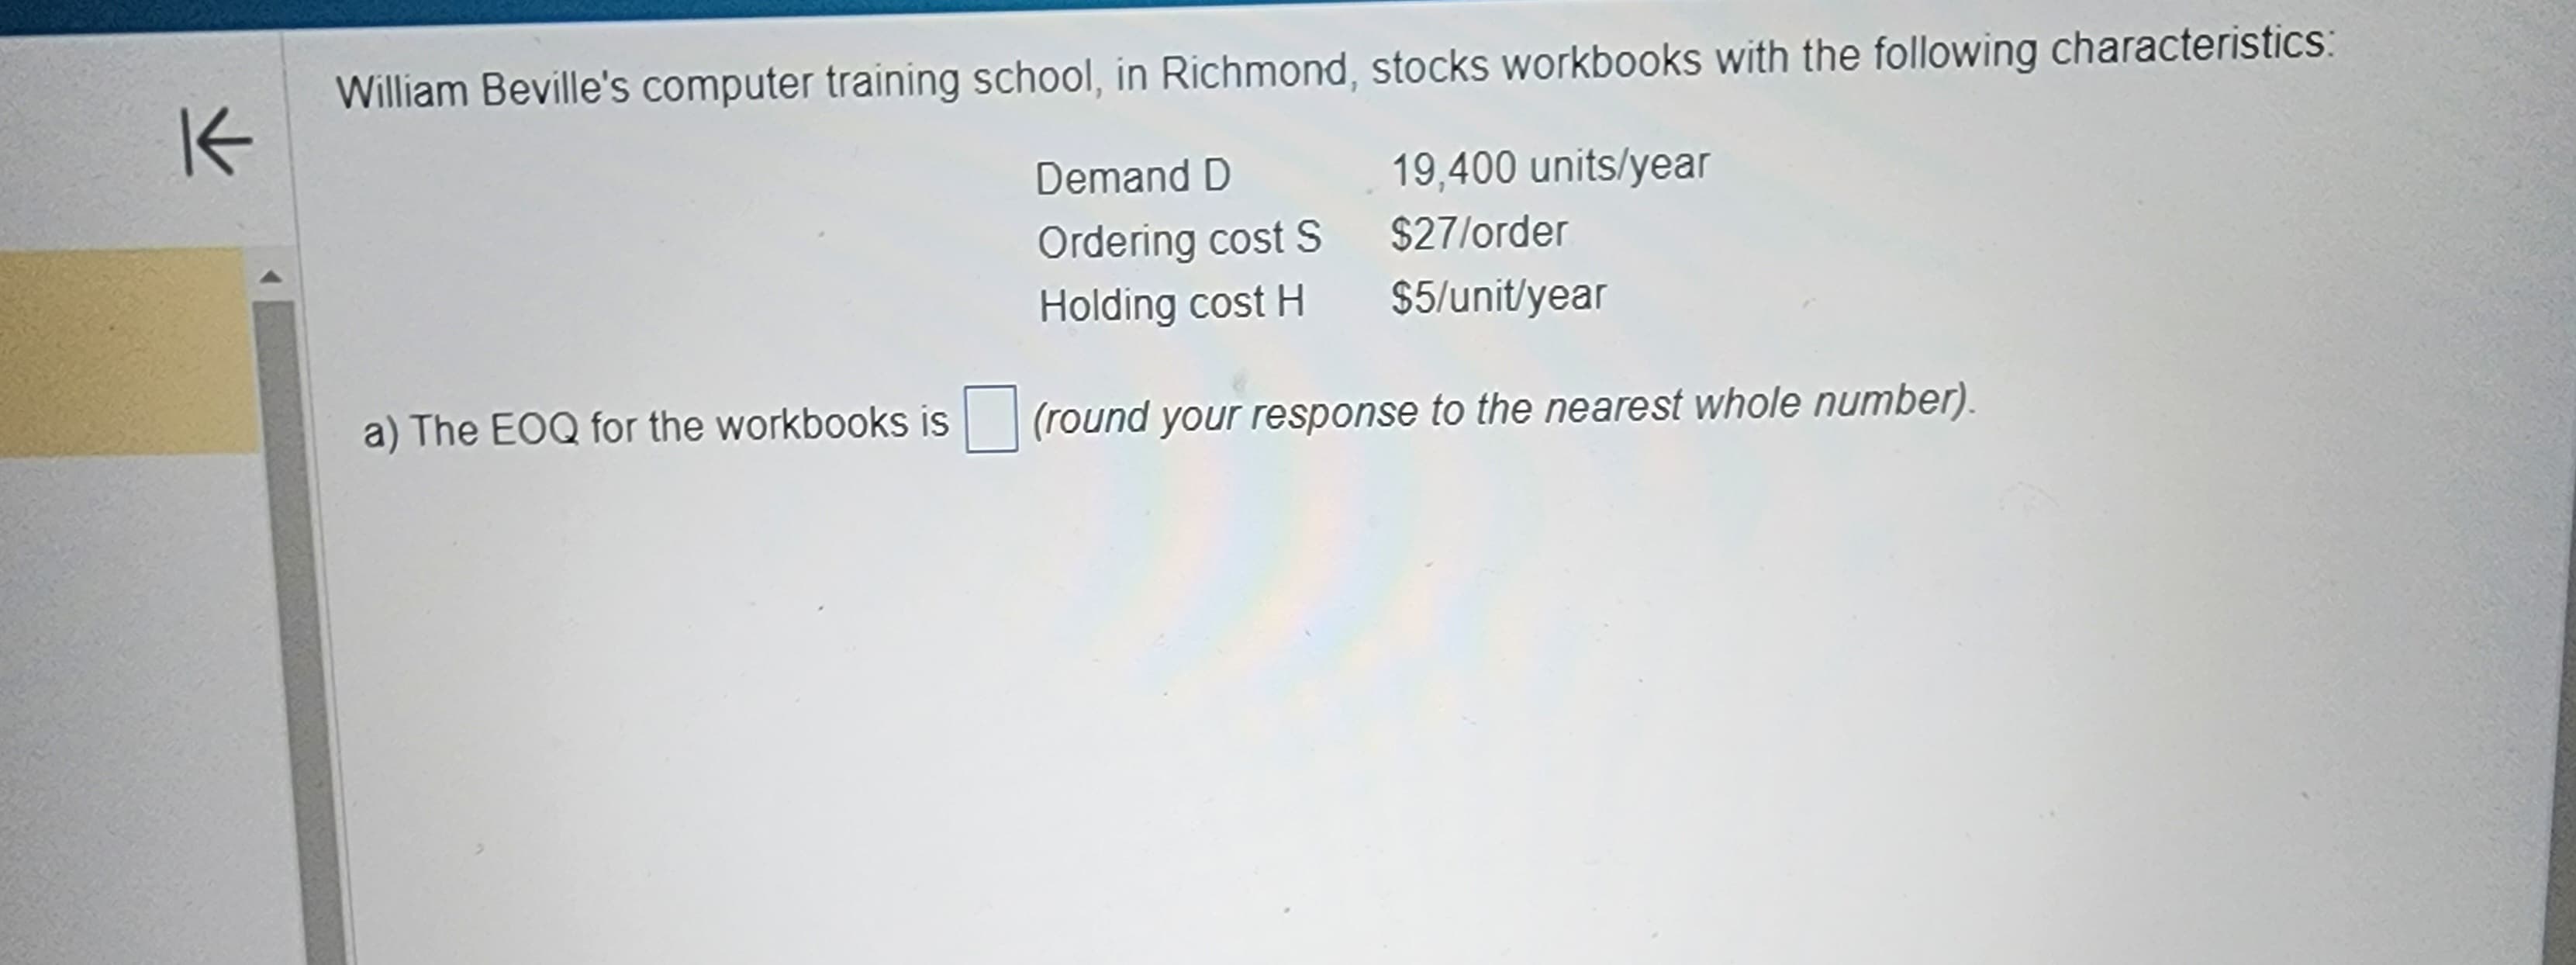 K
William Beville's computer training school, in Richmond, stocks workbooks with the following characteristics:
Demand D
19,400 units/year
$27/order
Ordering cost S
Holding cost H
$5/unit/year
a) The EOQ for the workbooks is (round your response to the nearest whole number).